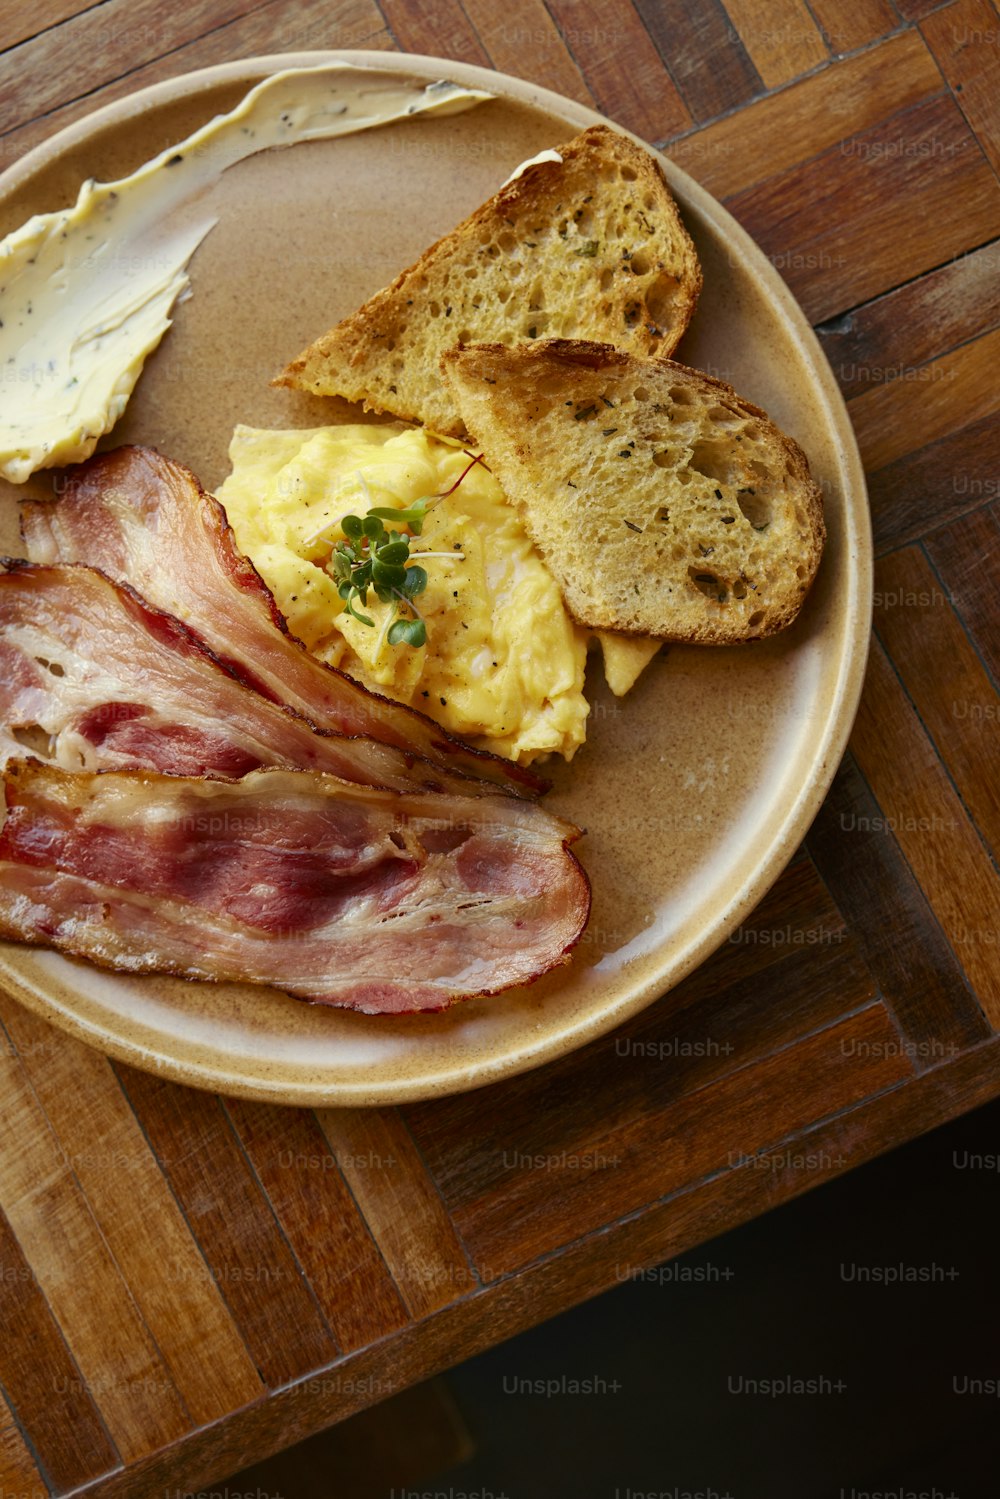 a plate of bacon, bread, and eggs on a wooden table